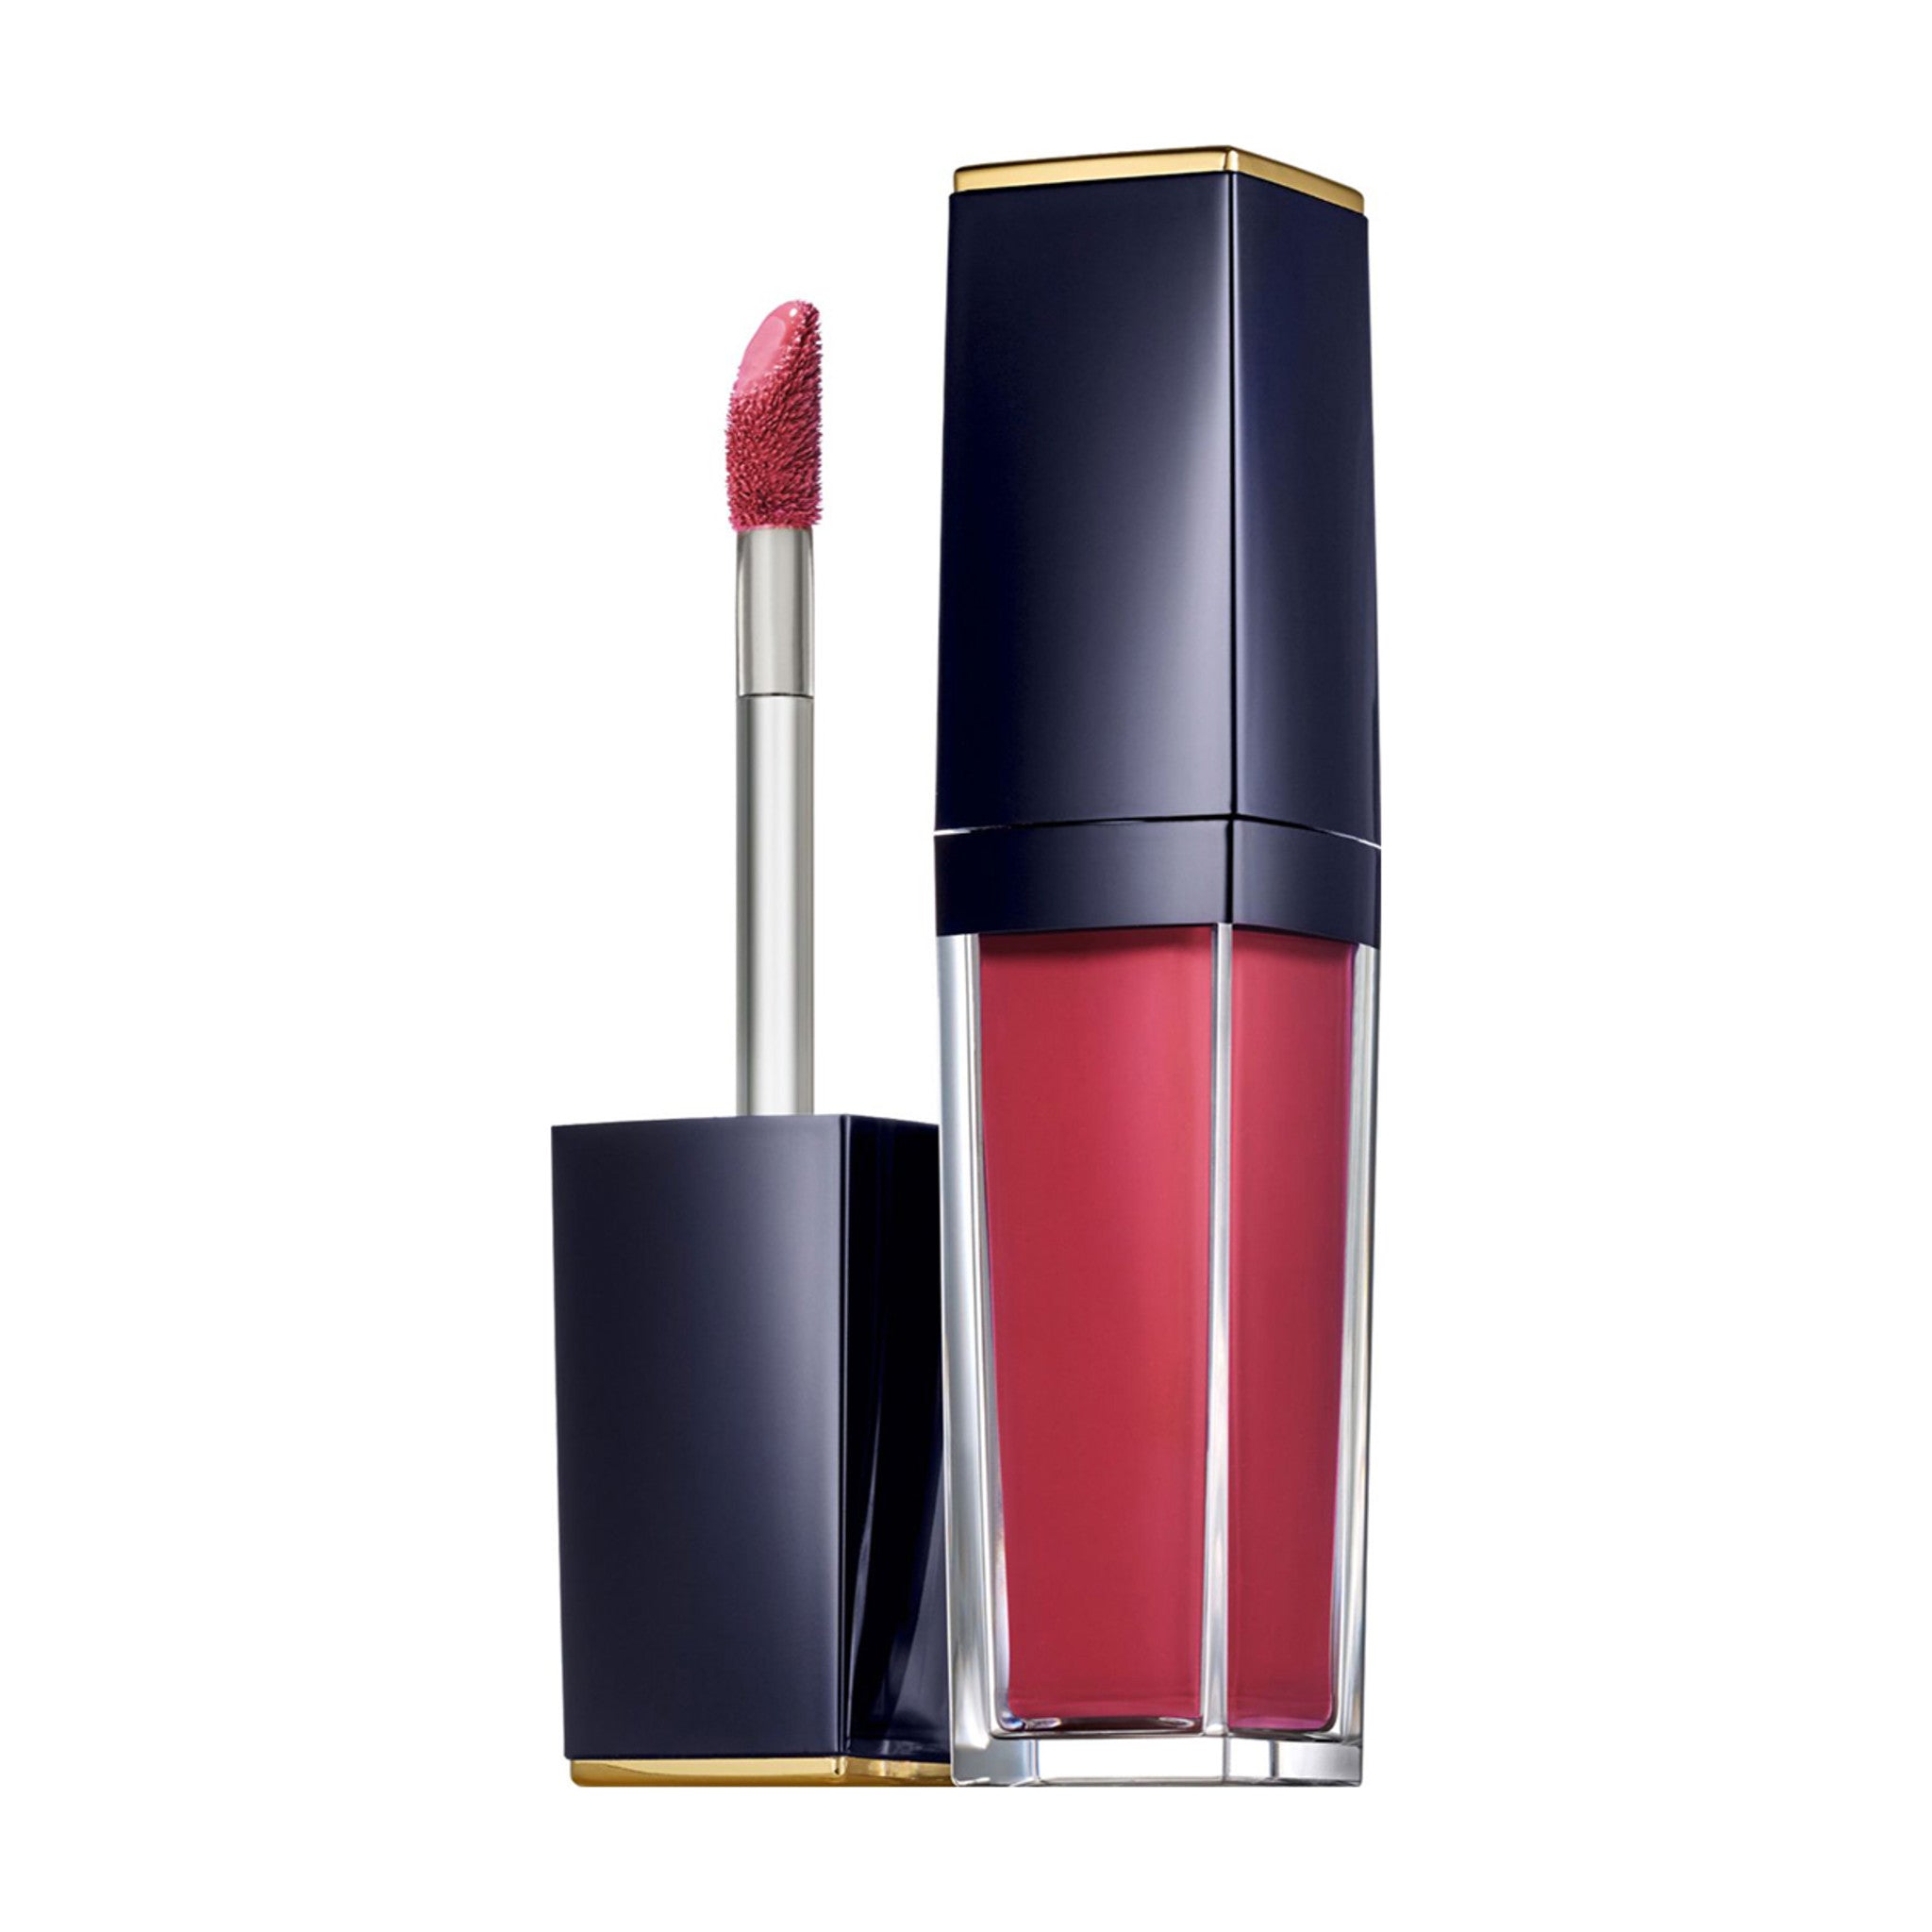 Estée Lauder Pure Color Envy Paint On Liquid Lipcolor Color/Shade variant: Rebellious Rose main image. This product is in the color pink